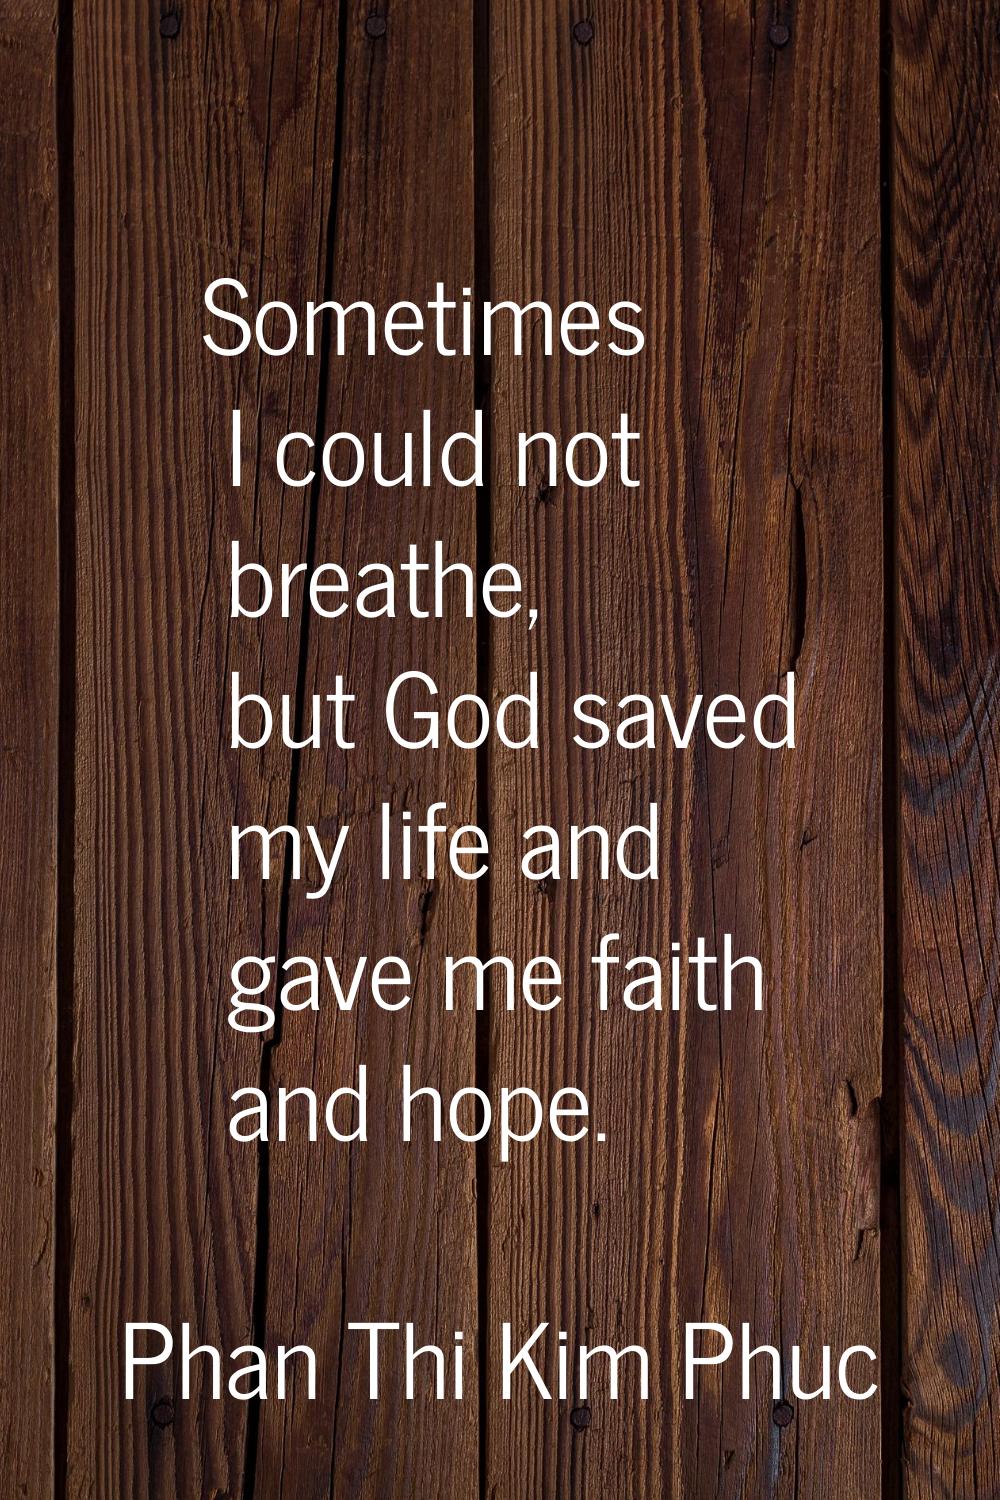 Sometimes I could not breathe, but God saved my life and gave me faith and hope.